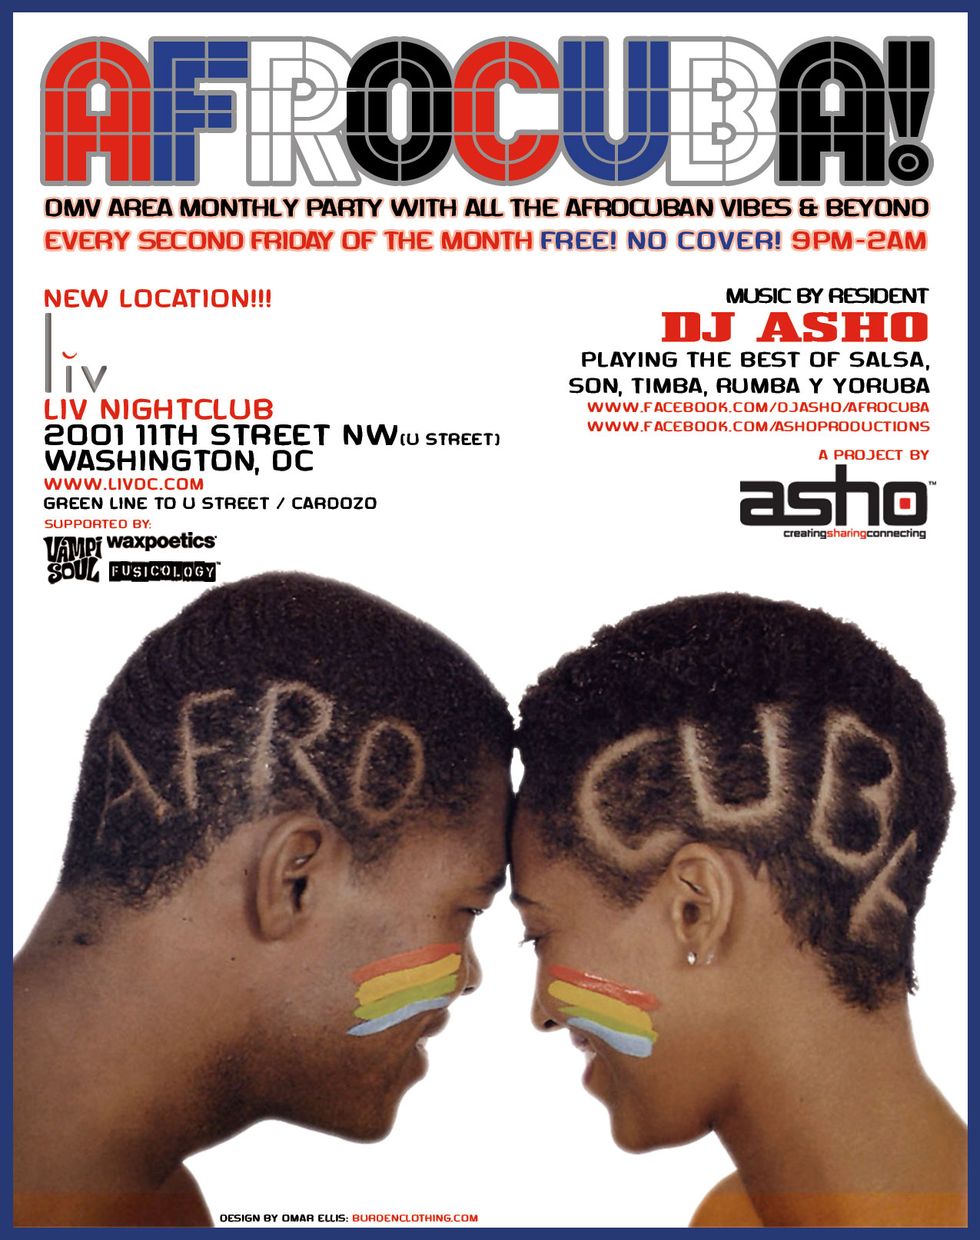 DC: Afrocuba, DMV Area's Monthly Party Begins This Friday (5/13)